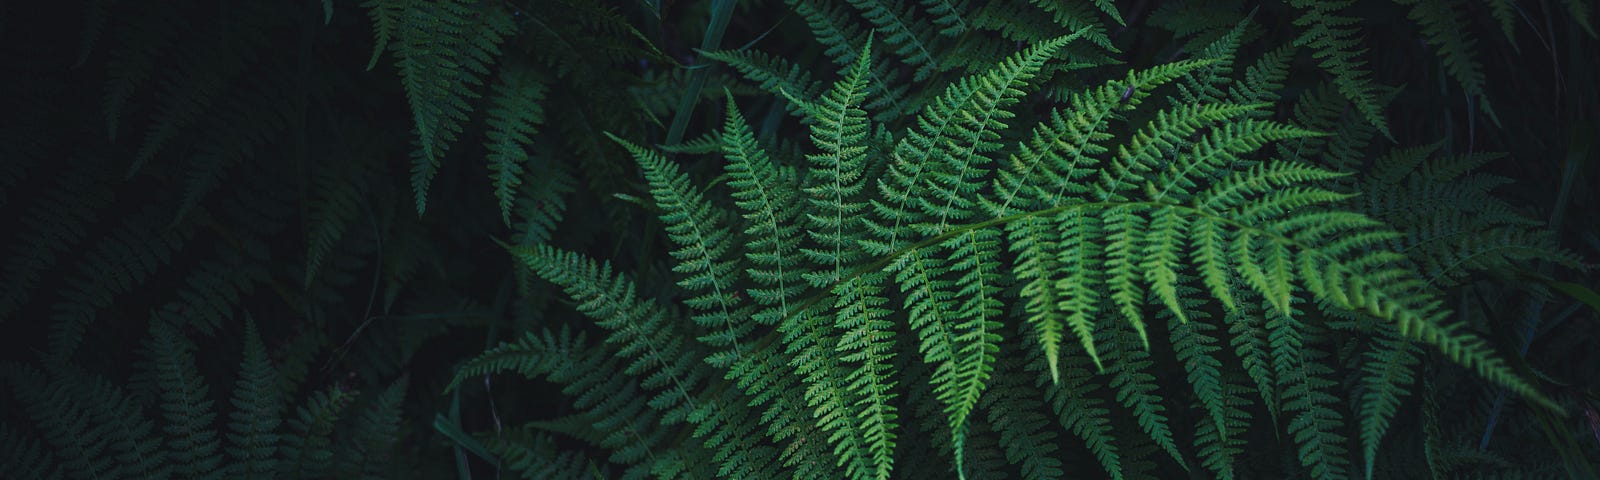 A group of fern leaves shrouded in pitch black darkness